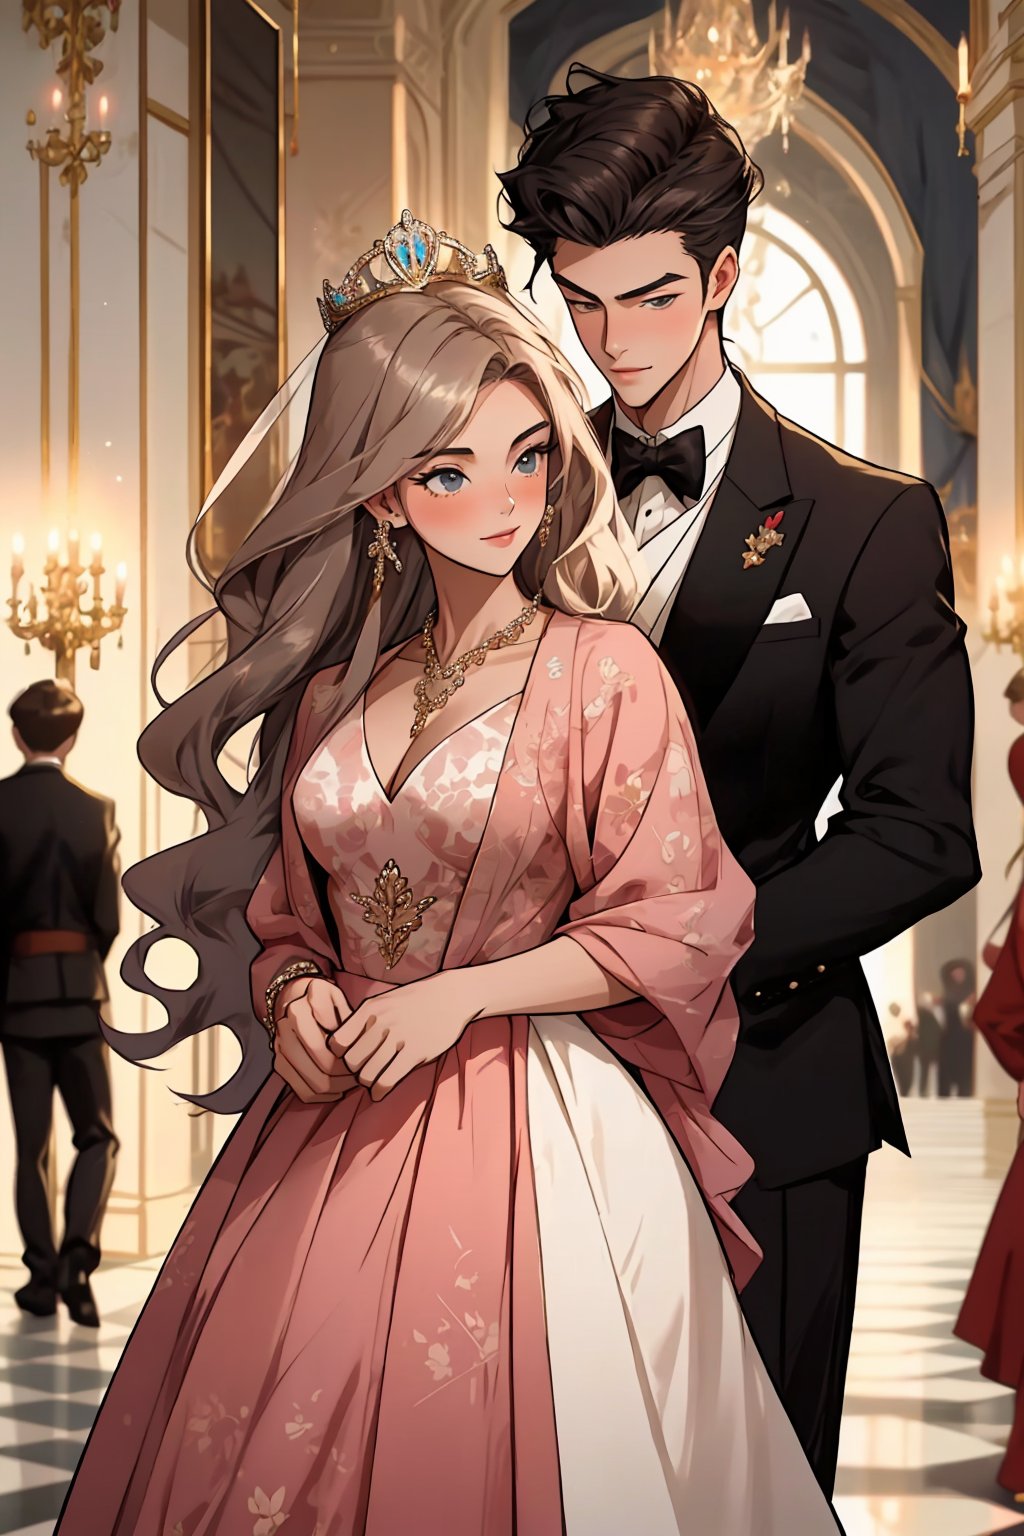 1girl, 1boy, a handsome boy and a pretty girl entering to the royal ball